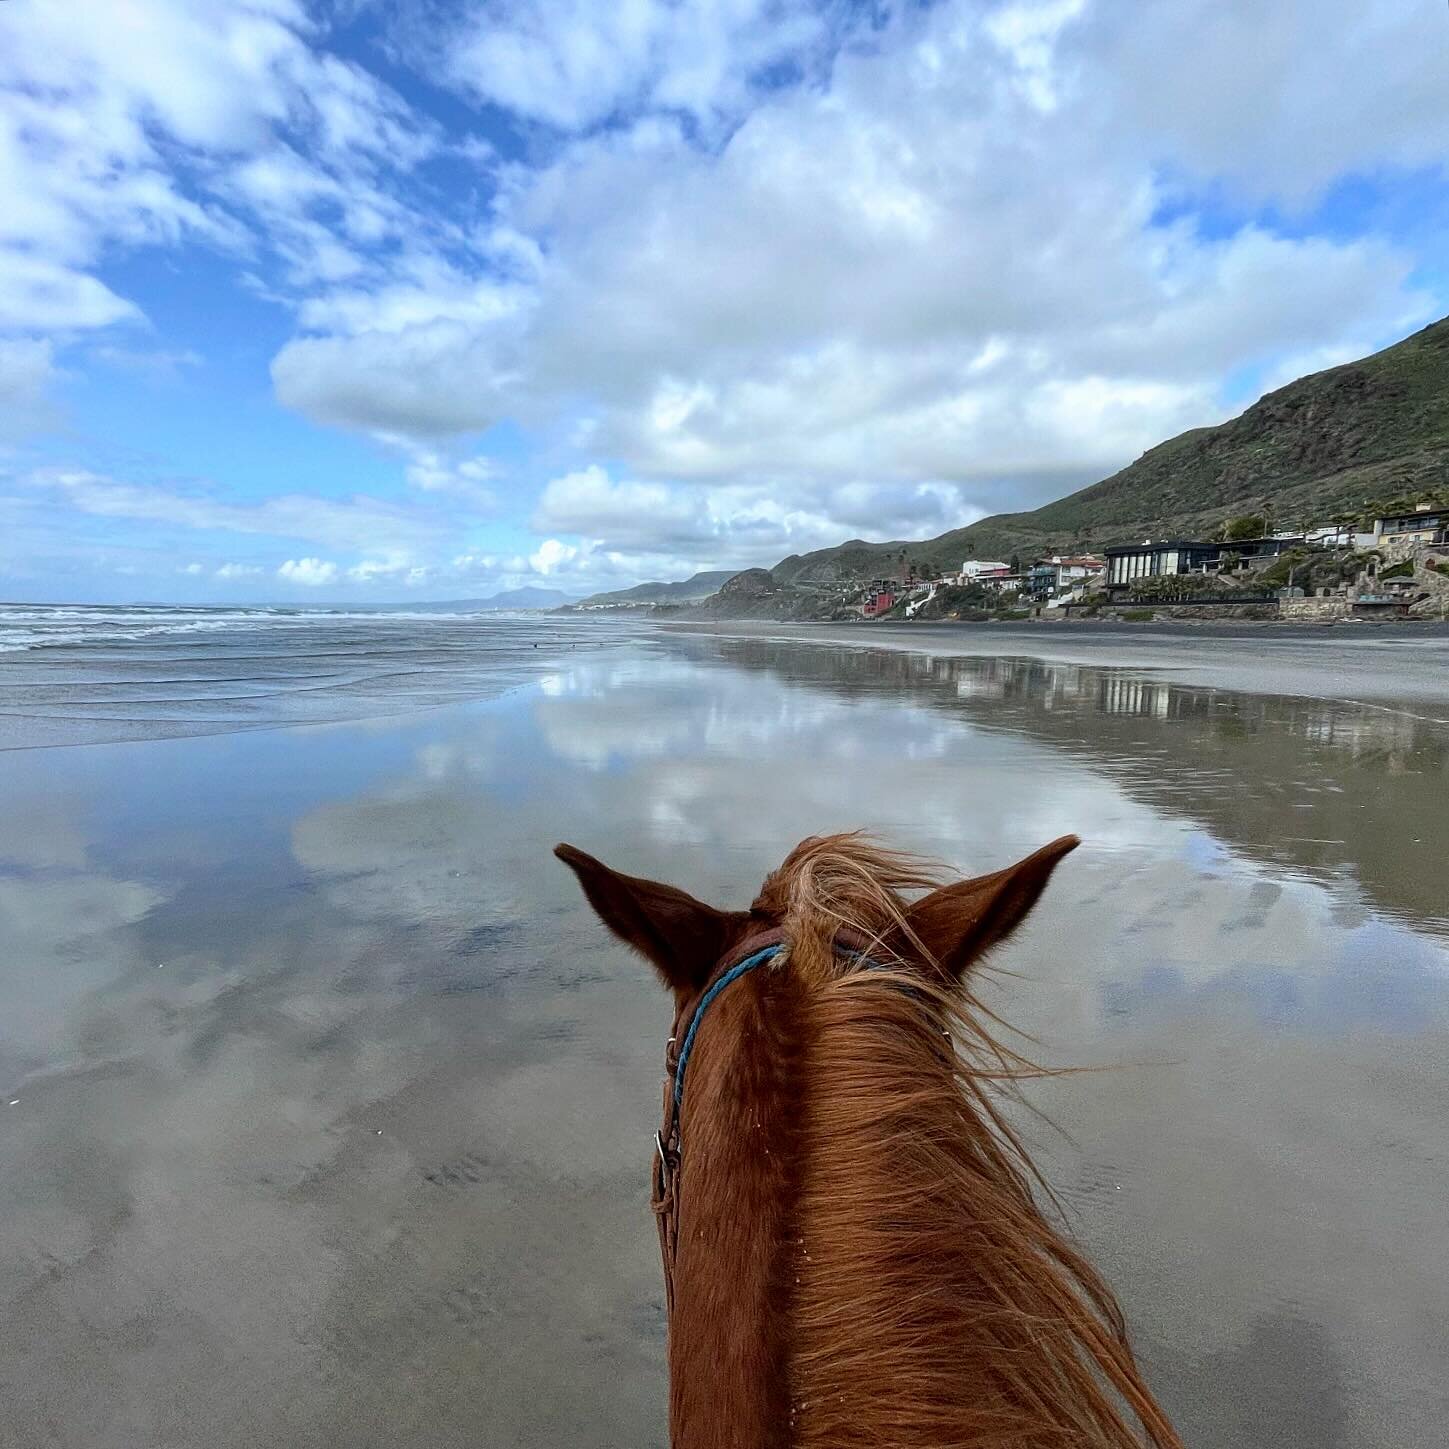 Ready for a change of scenery? #horsebackriding like you&rsquo;ve always dreamed it could be. 

Get away, get outside, and rewild your life! 

What are you waiting for? 

#horsesbyjose #horsebackadventures #horseriding #bajacaliforniamexico #getoutsi